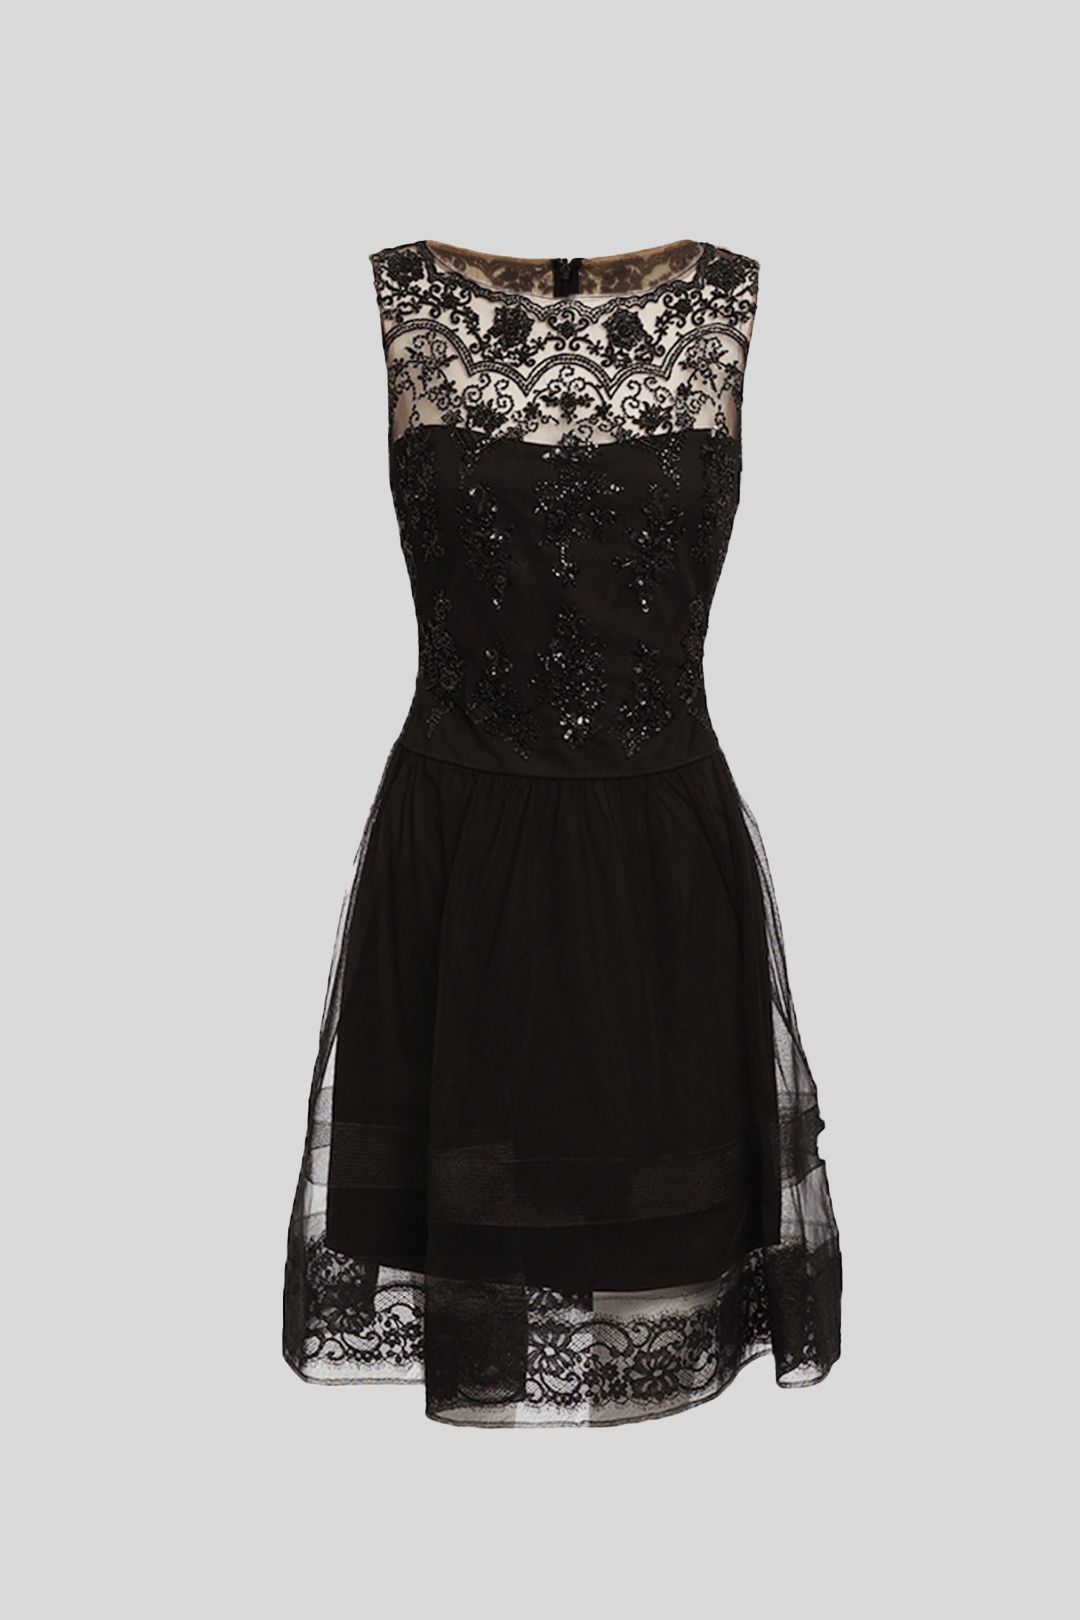 Marchesa notte - Black Lace Fit and Flare Mini Dress